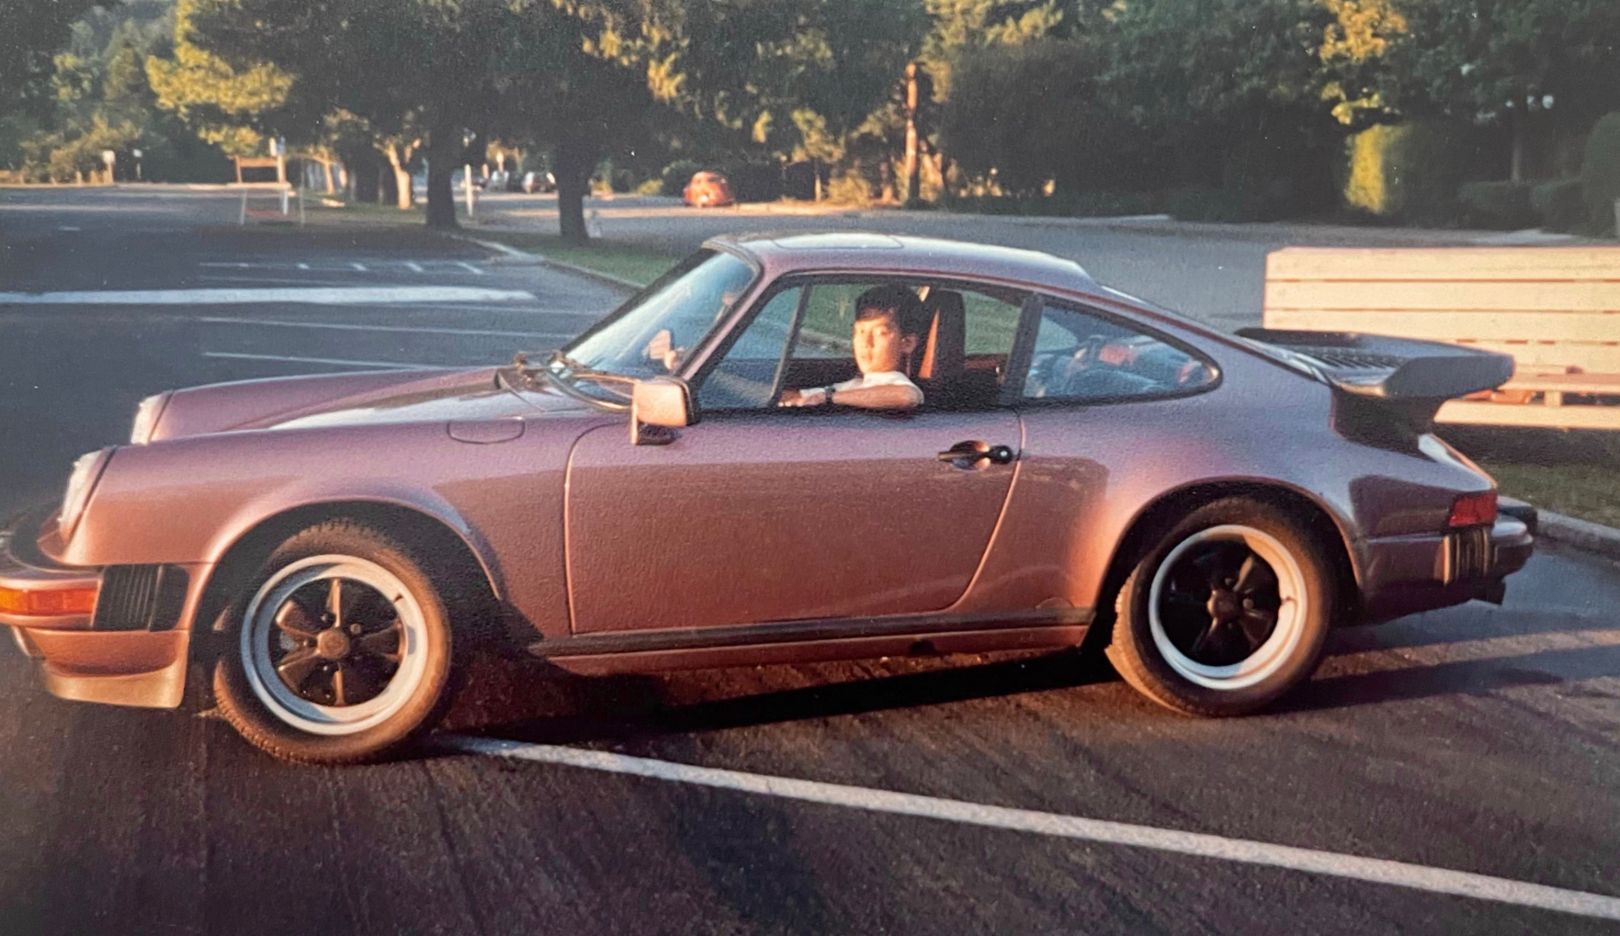 Daniel Wu gets behind the wheel of the Porsche 911 for the first time – sitting in school that day, the twelve-year-old couldn’t wait to see the new vehicle. This ignited Daniel Wu’s interest in sports cars and Porsche. 